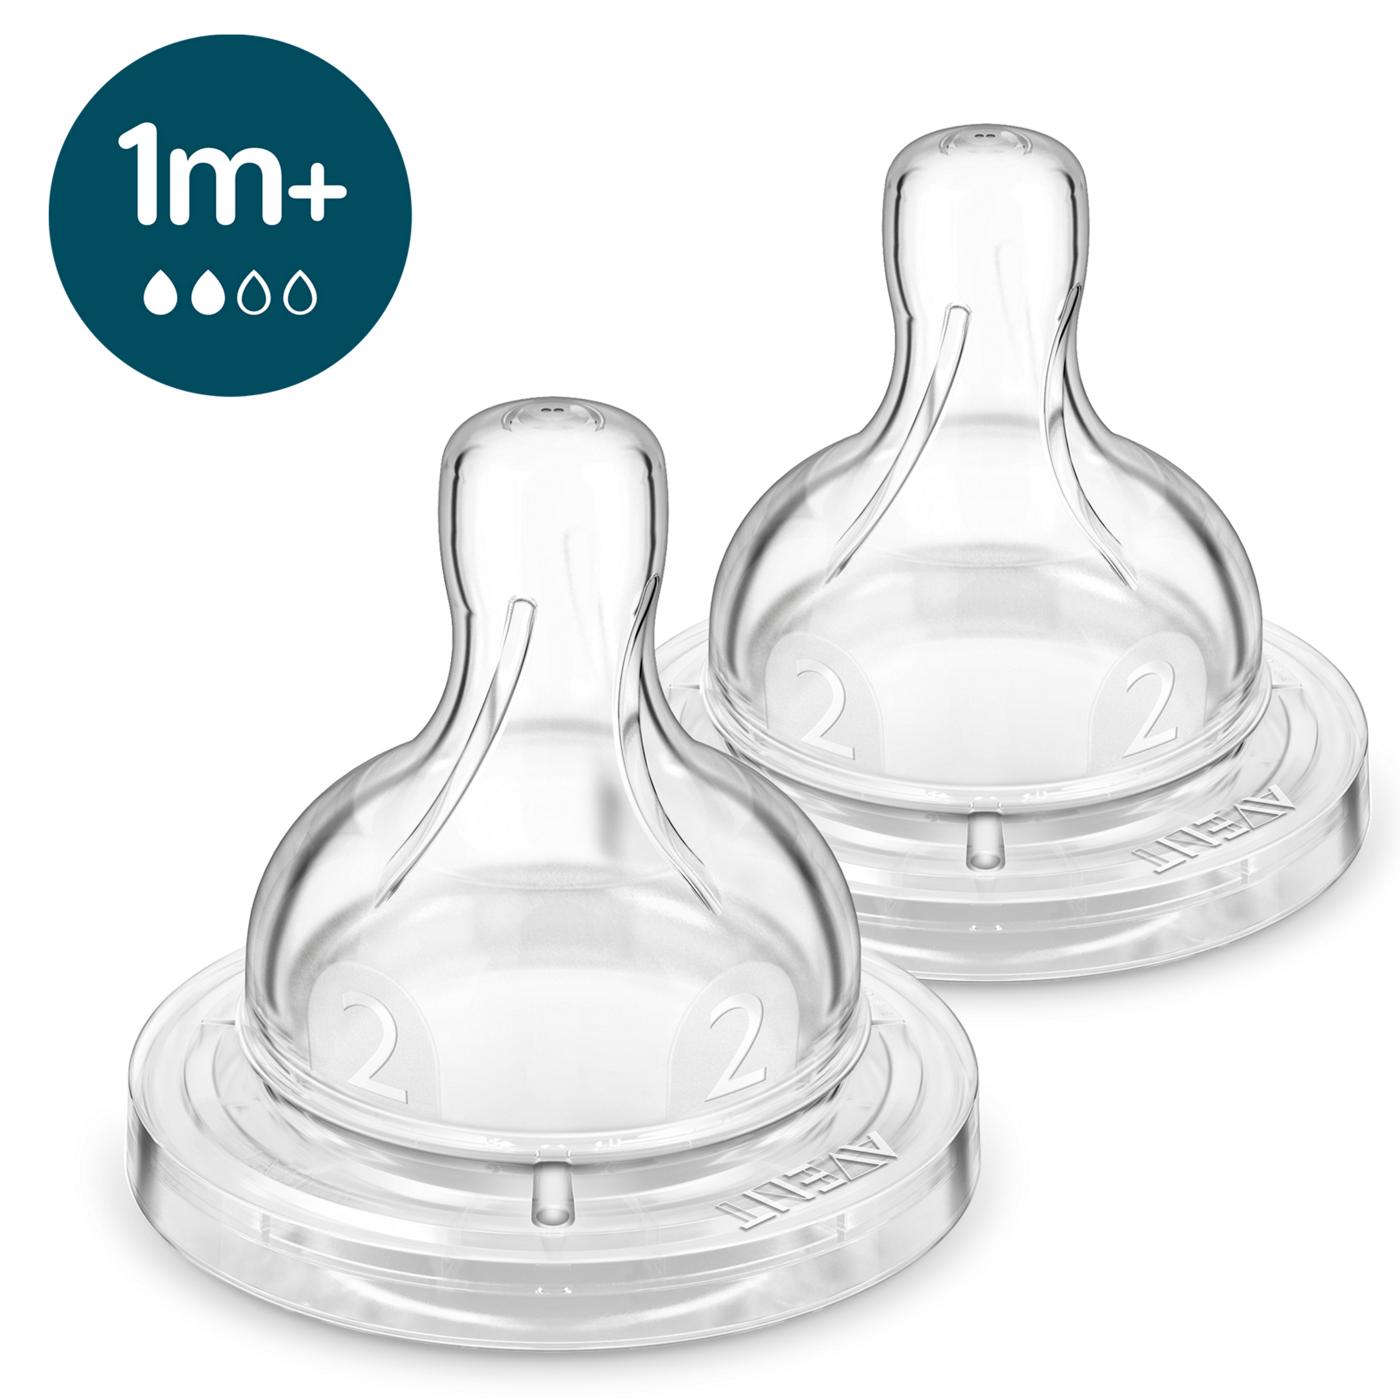 Avent Slow Flow Nipples - 1M+; image 5 of 6